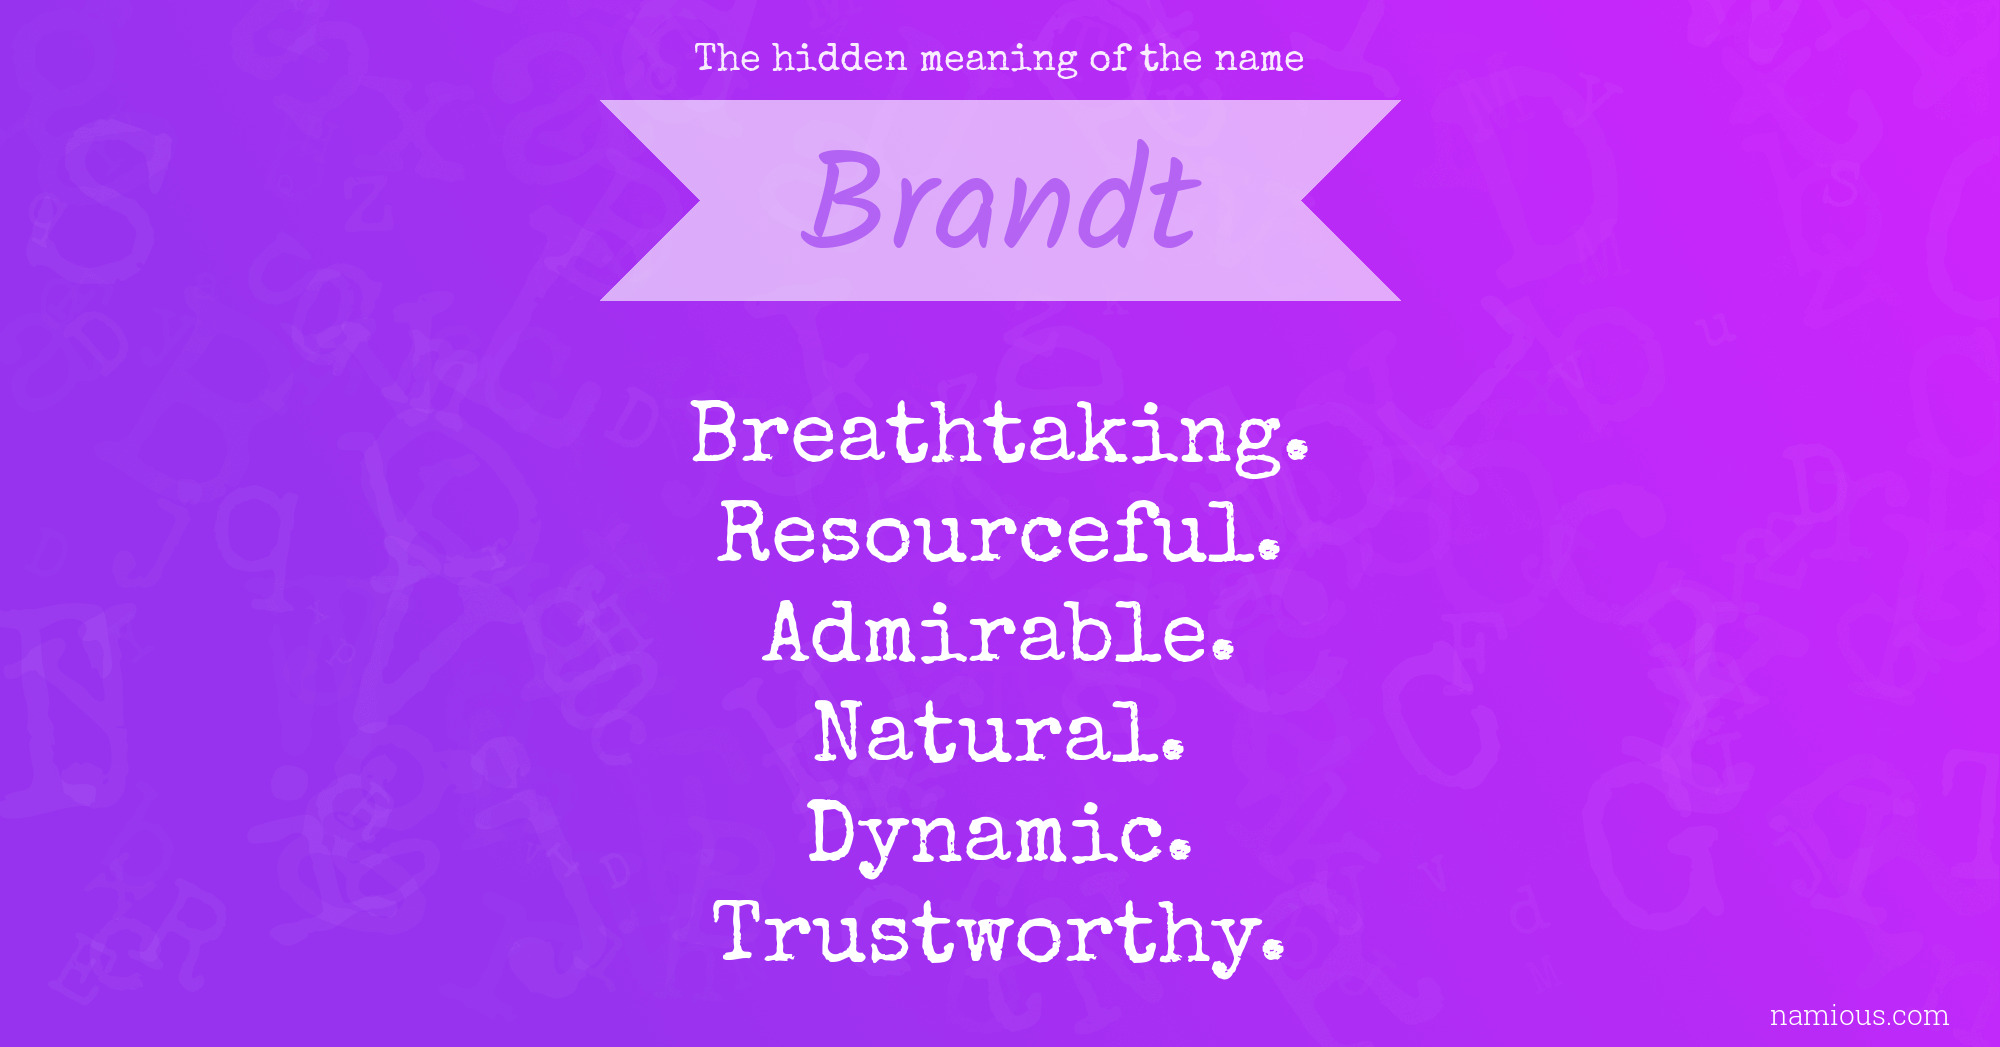 The hidden meaning of the name Brandt